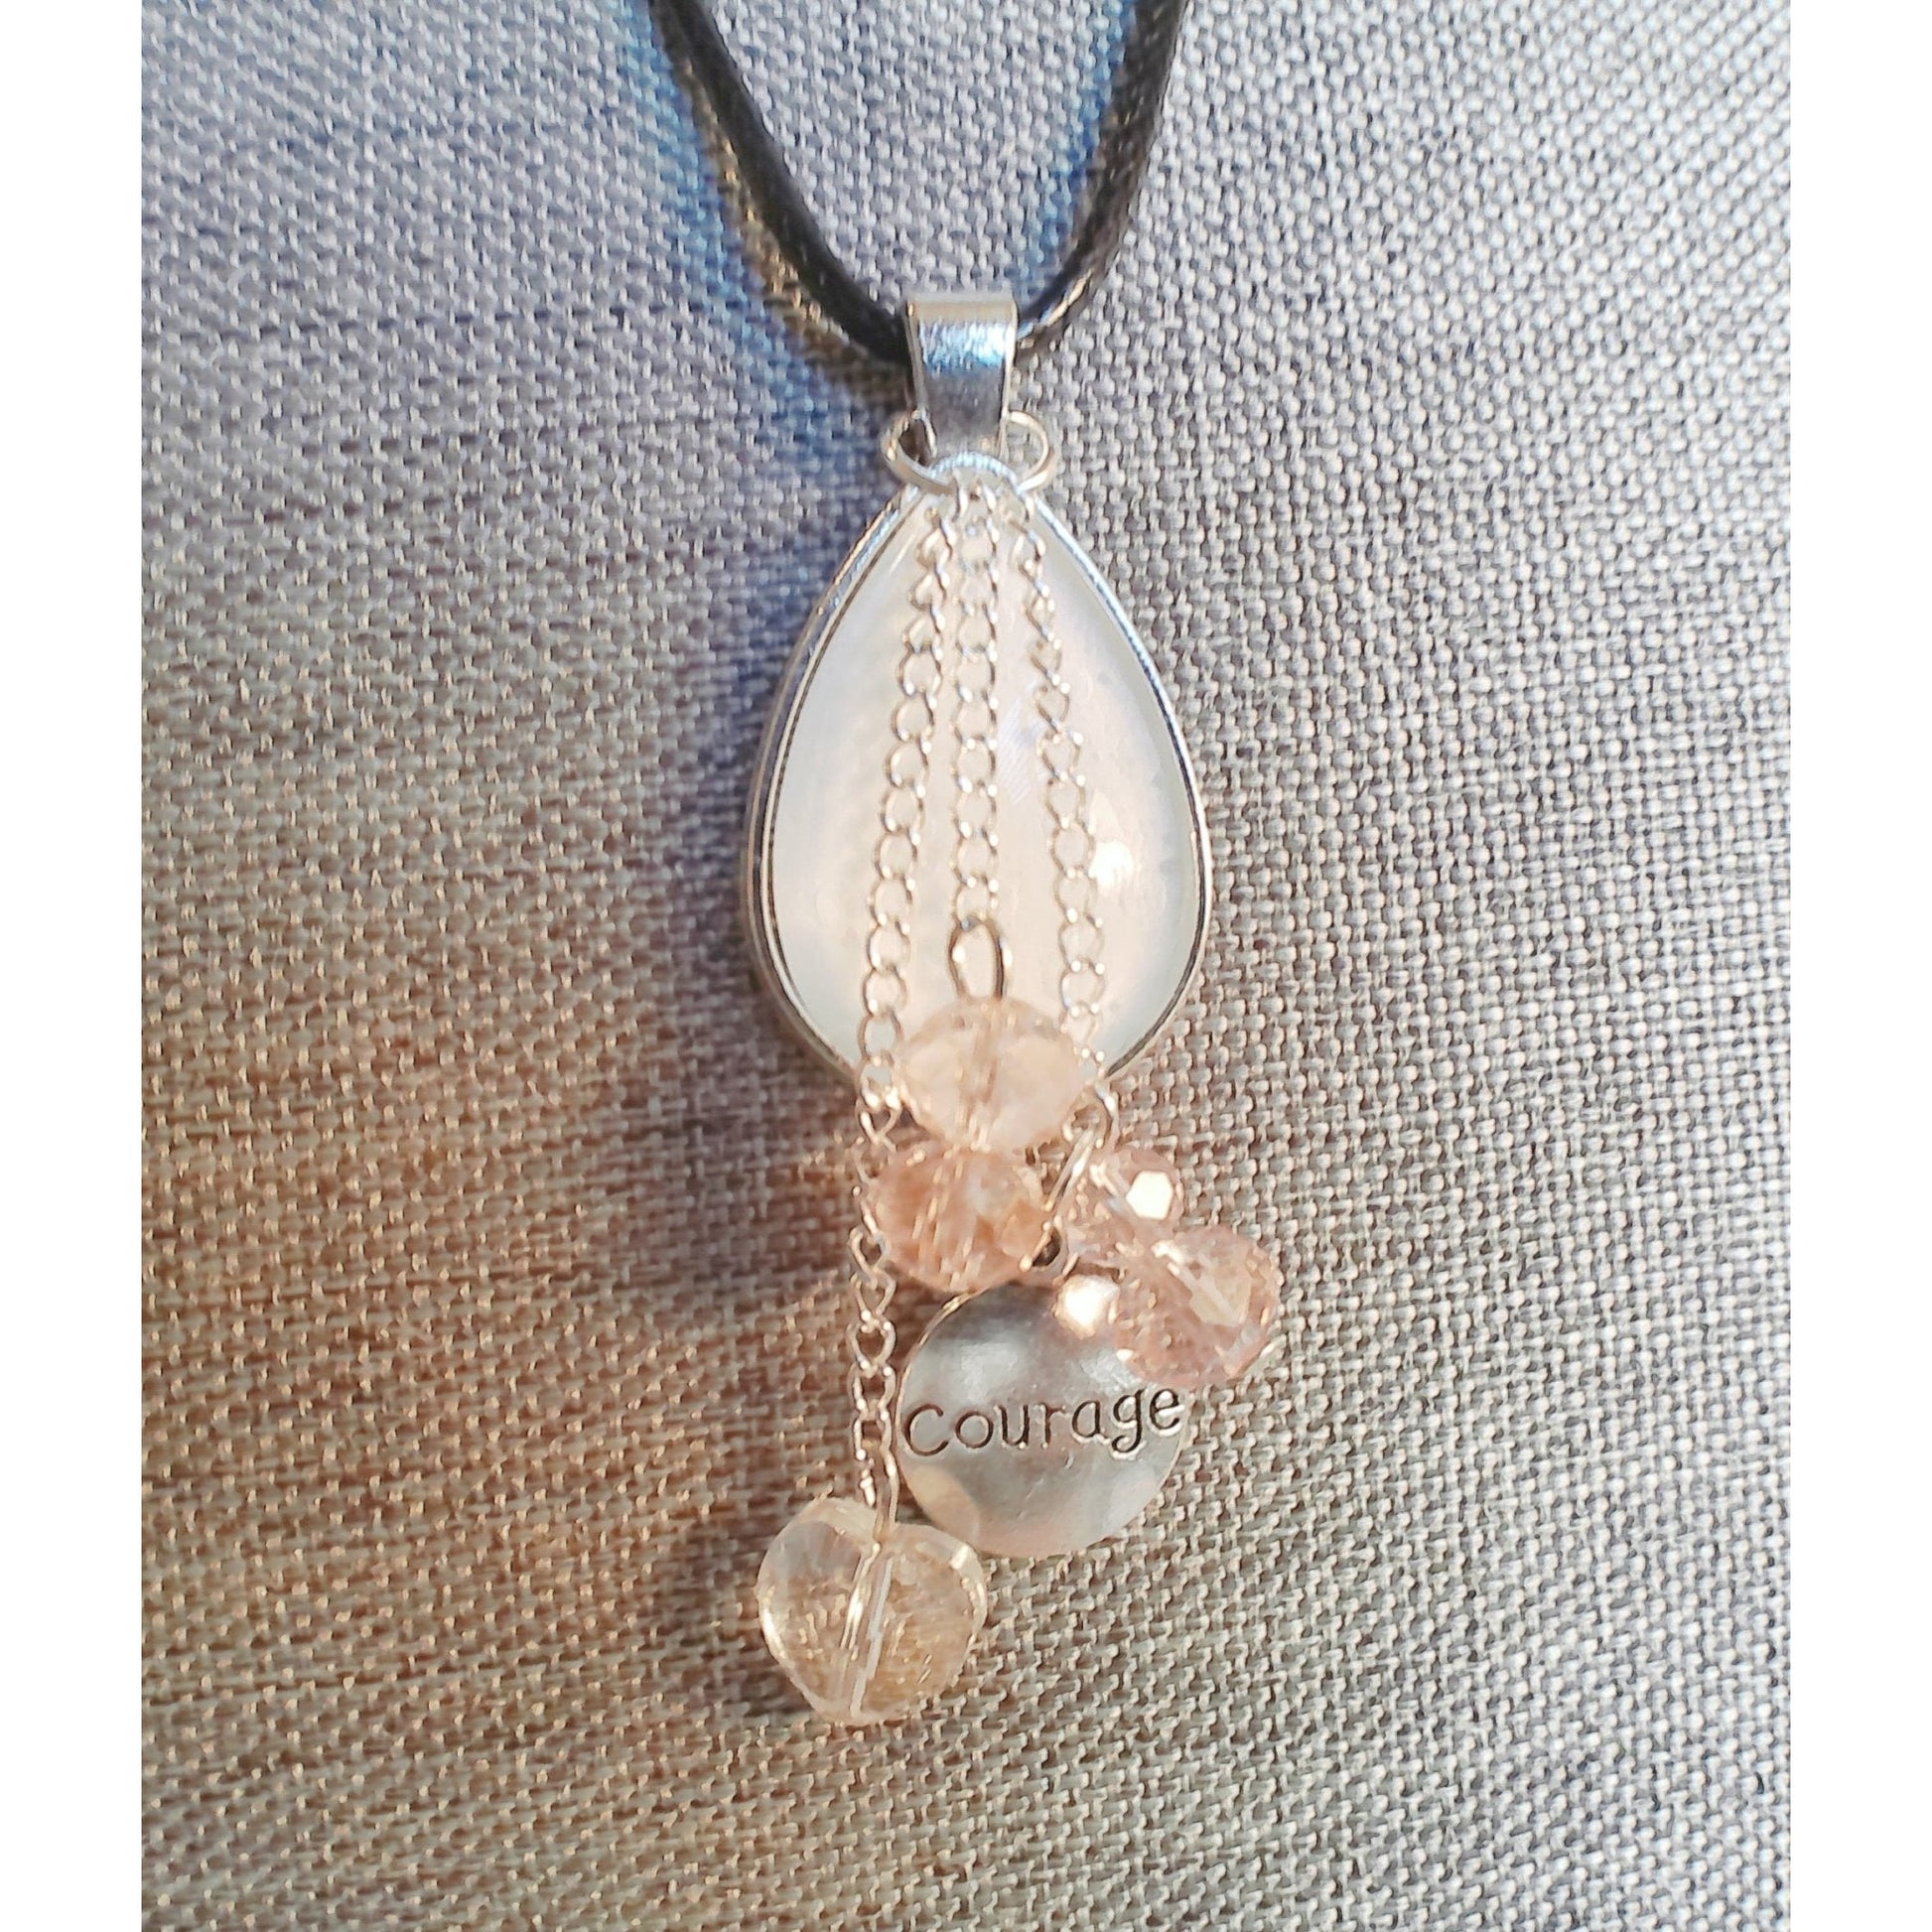 Dewdrop 8 Pendant Necklace - Rhapsody and Renascence